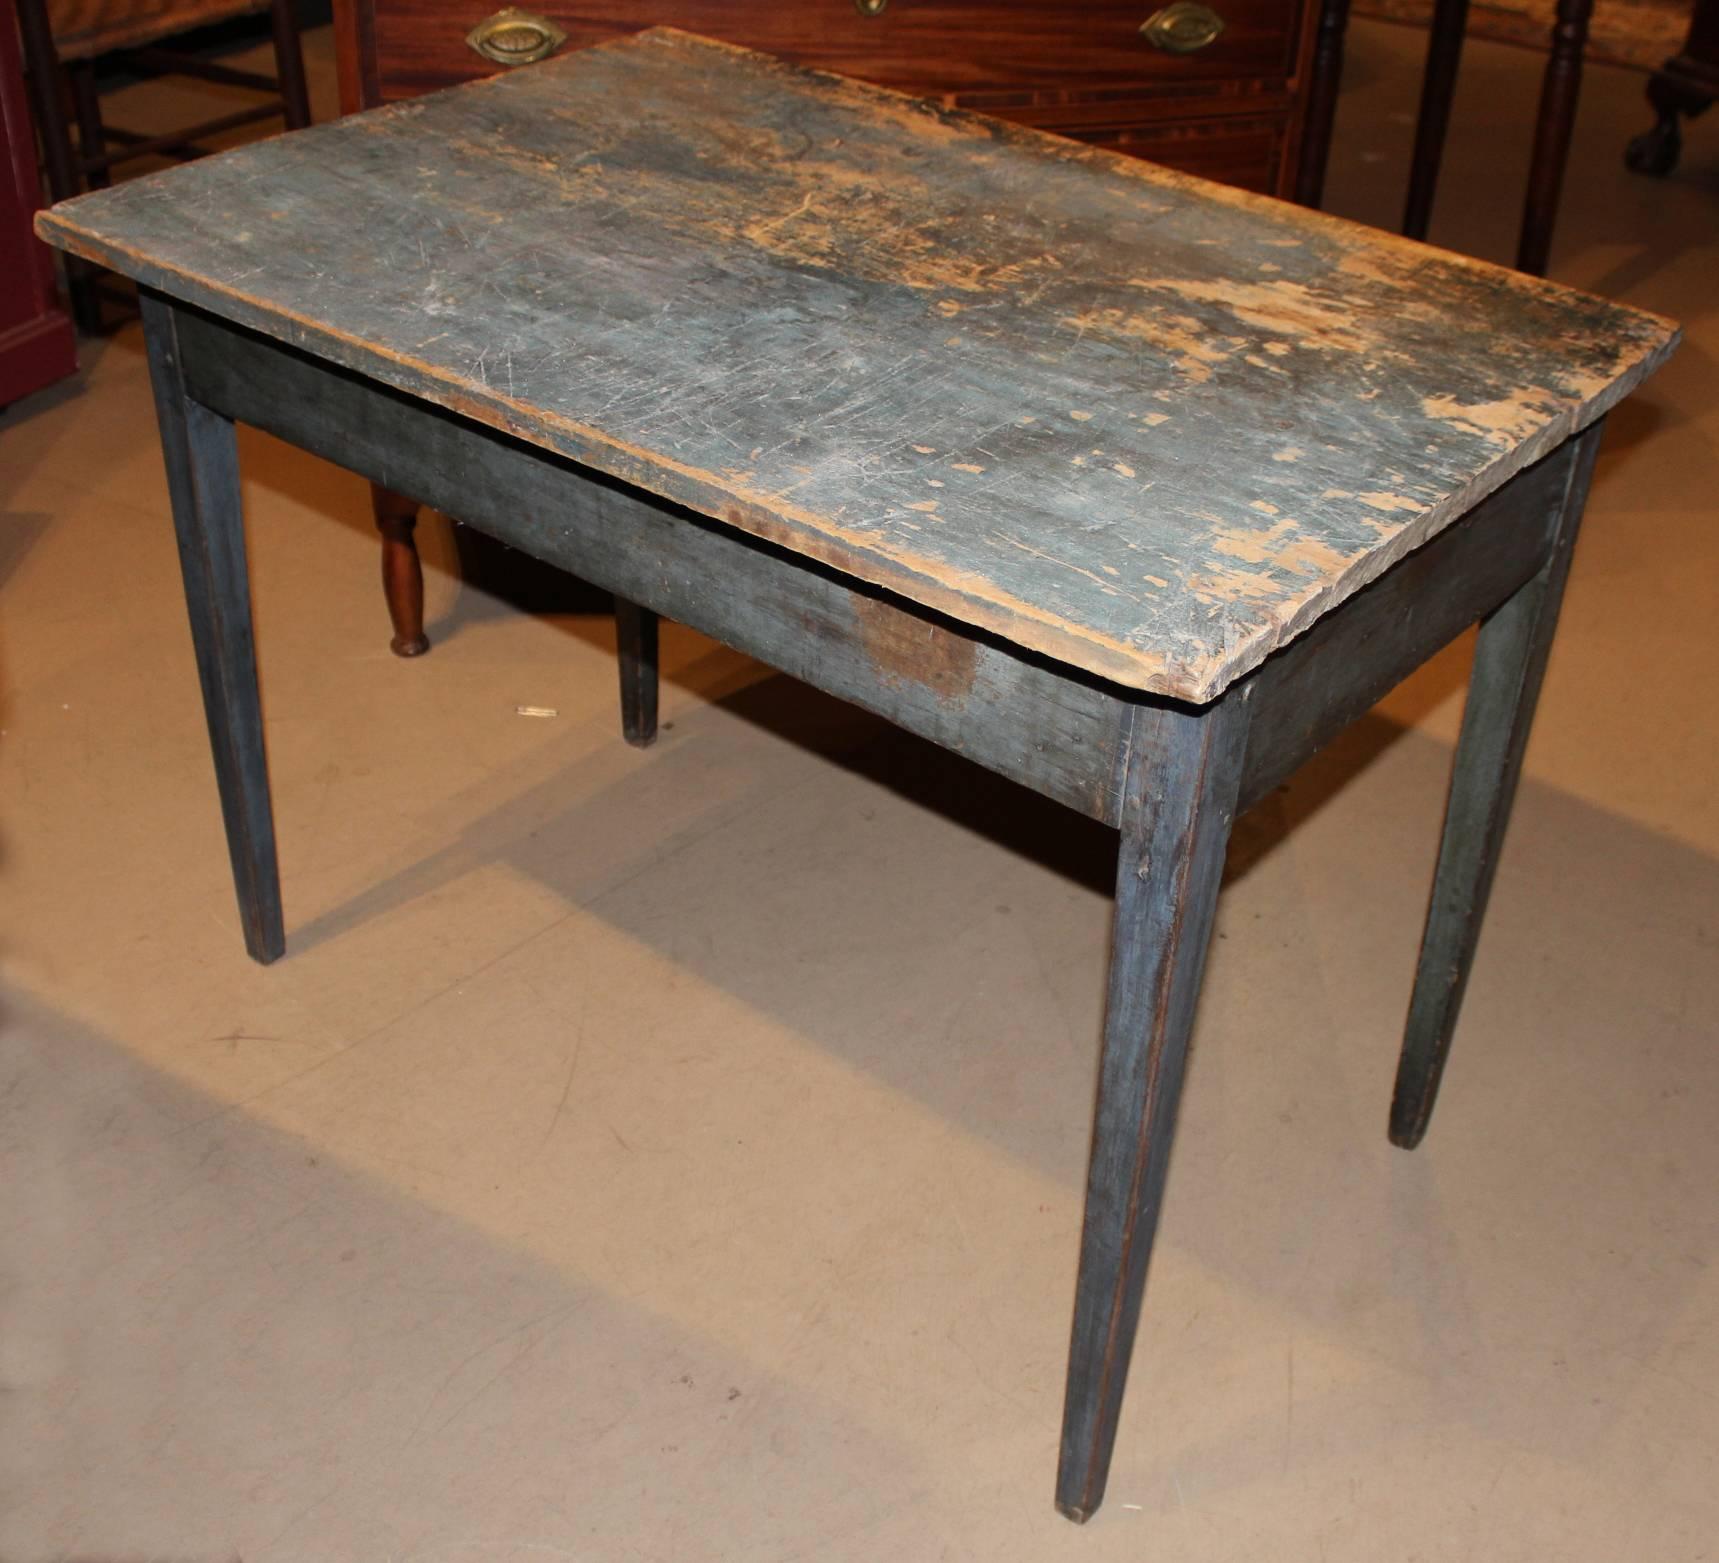 Painted Early 19th Century American Pine Work Table in Old Blue Paint